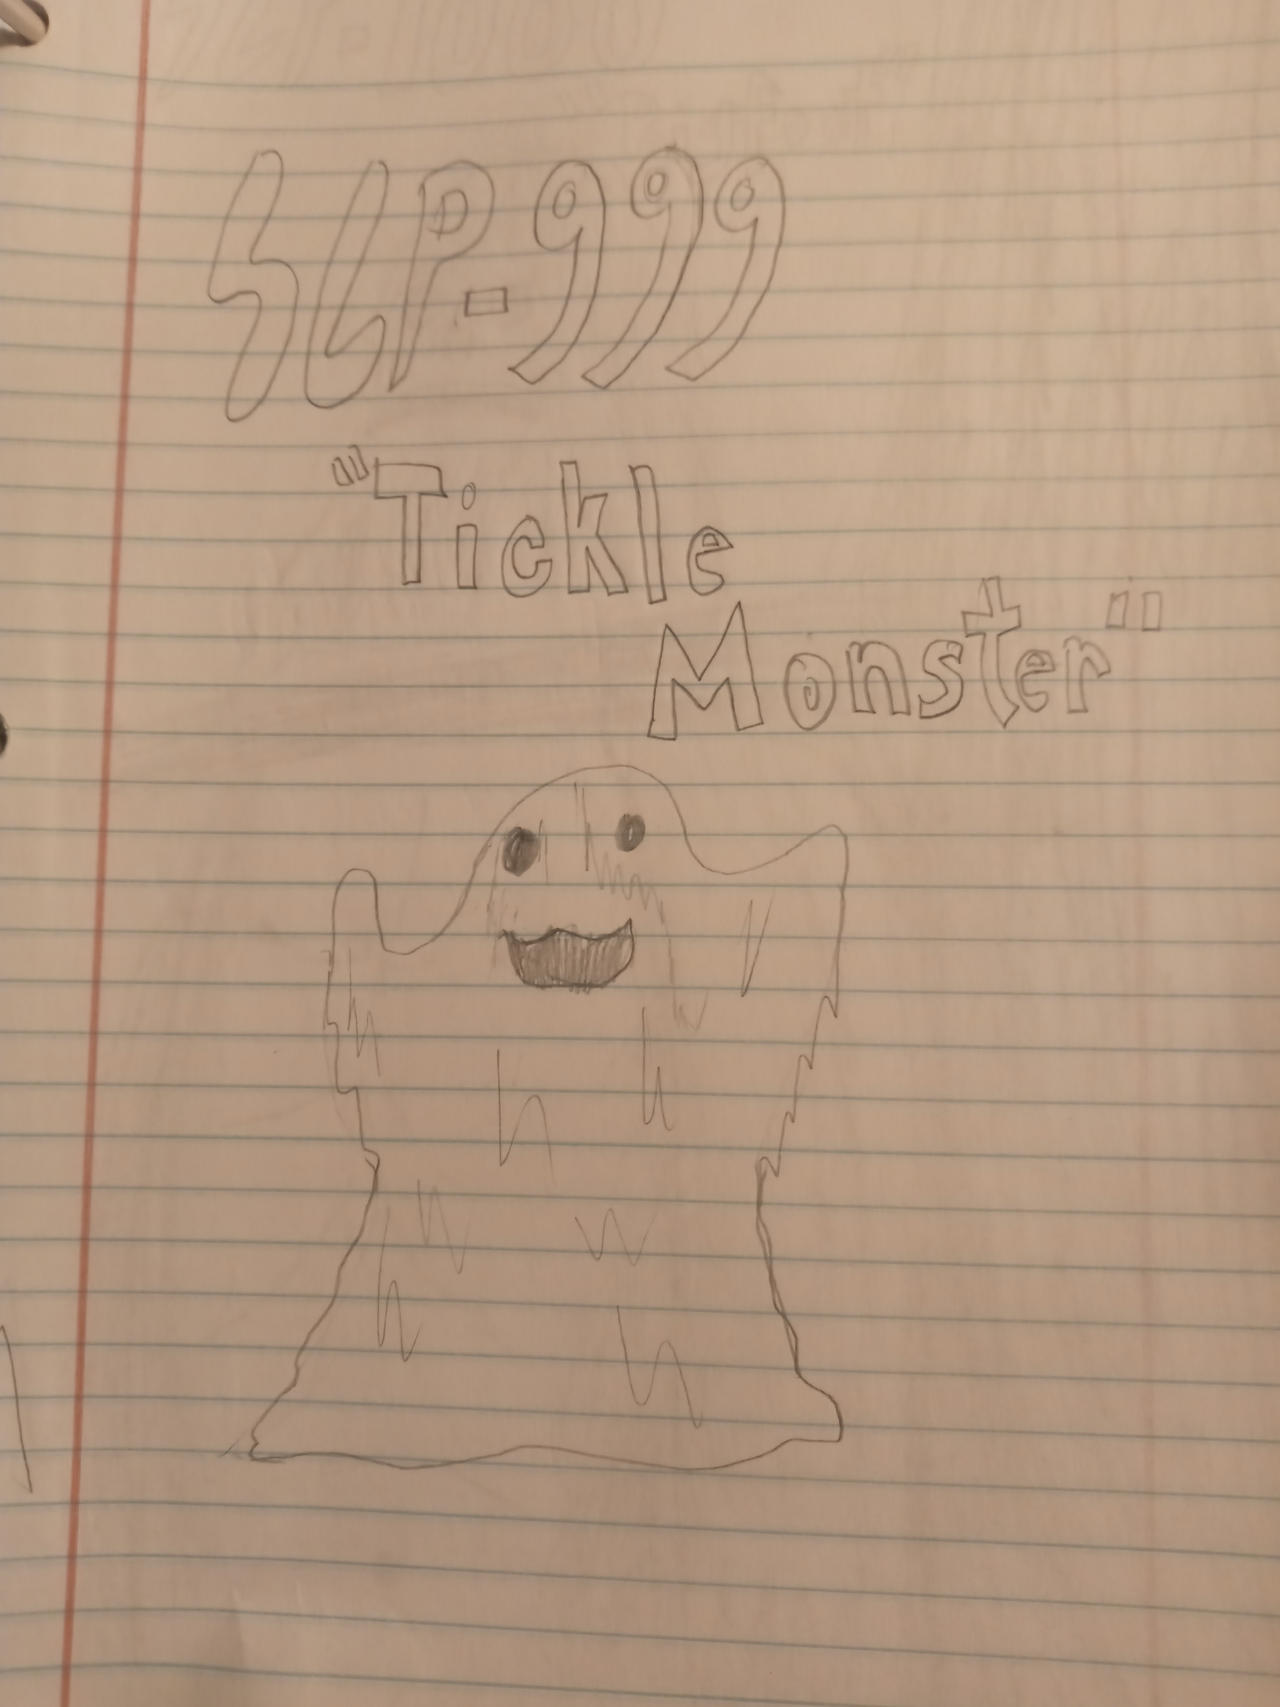 SCP-999 aka The Tickle Monster: Anthropomorphized by Kurozart on DeviantArt